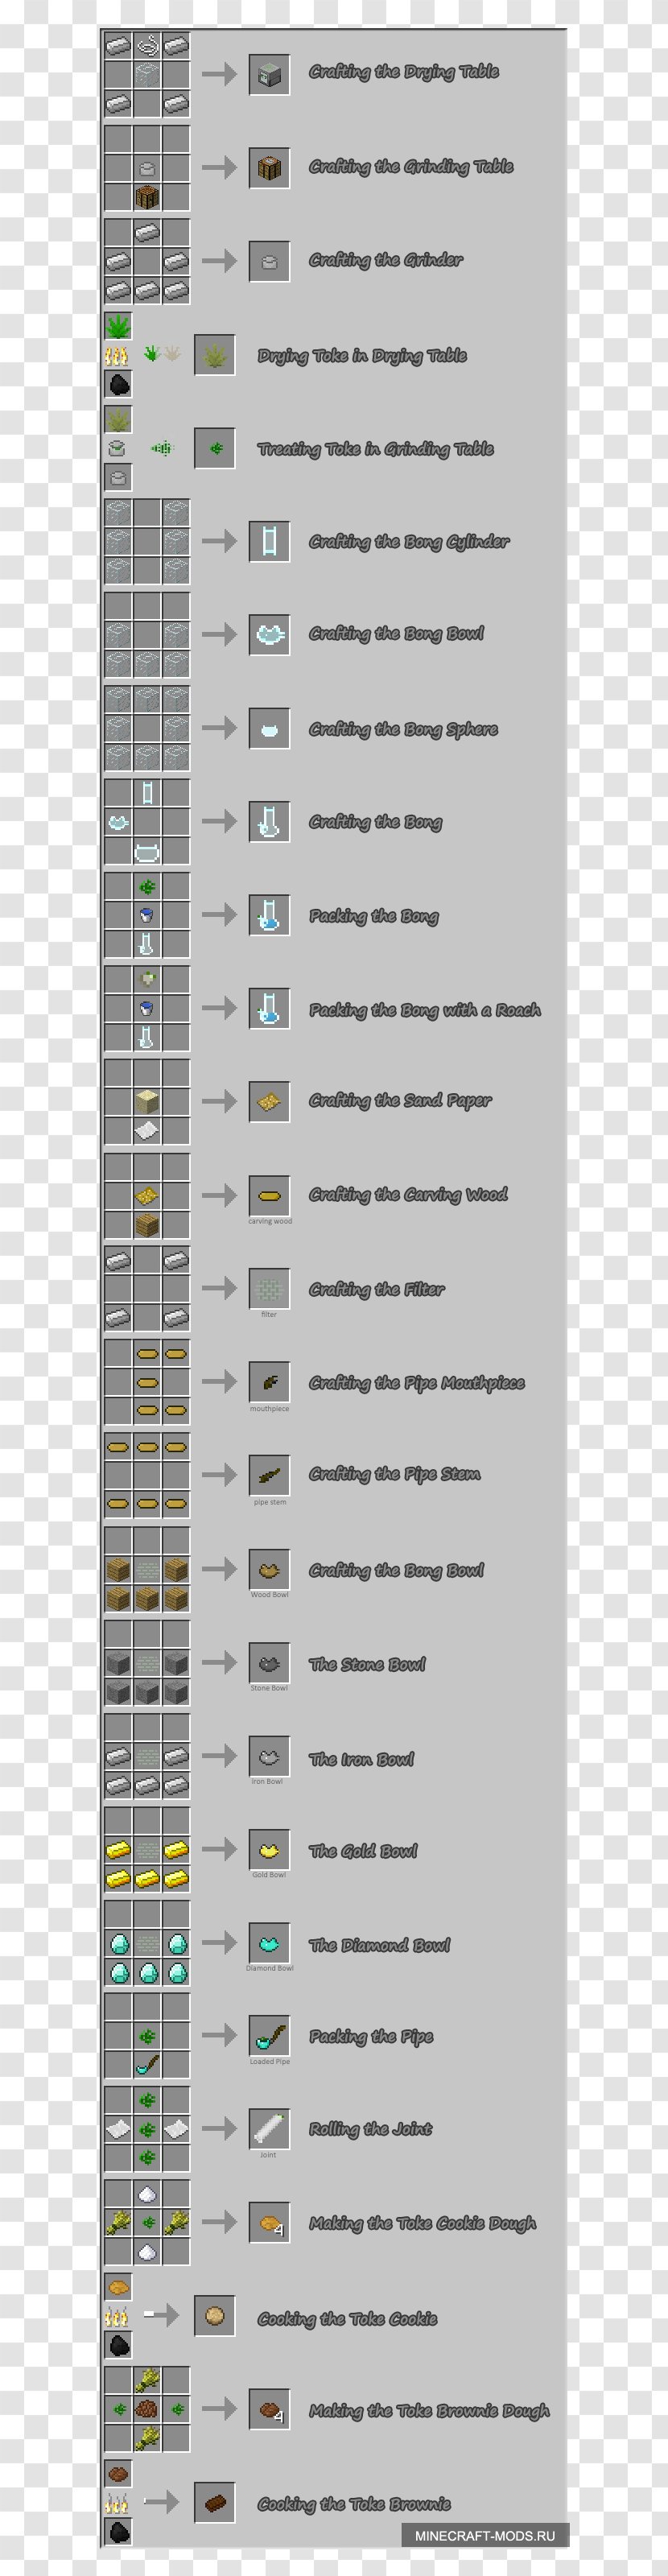 Minecraft Mods Video Game Item - Nonplayer Character - LNG Transparent PNG